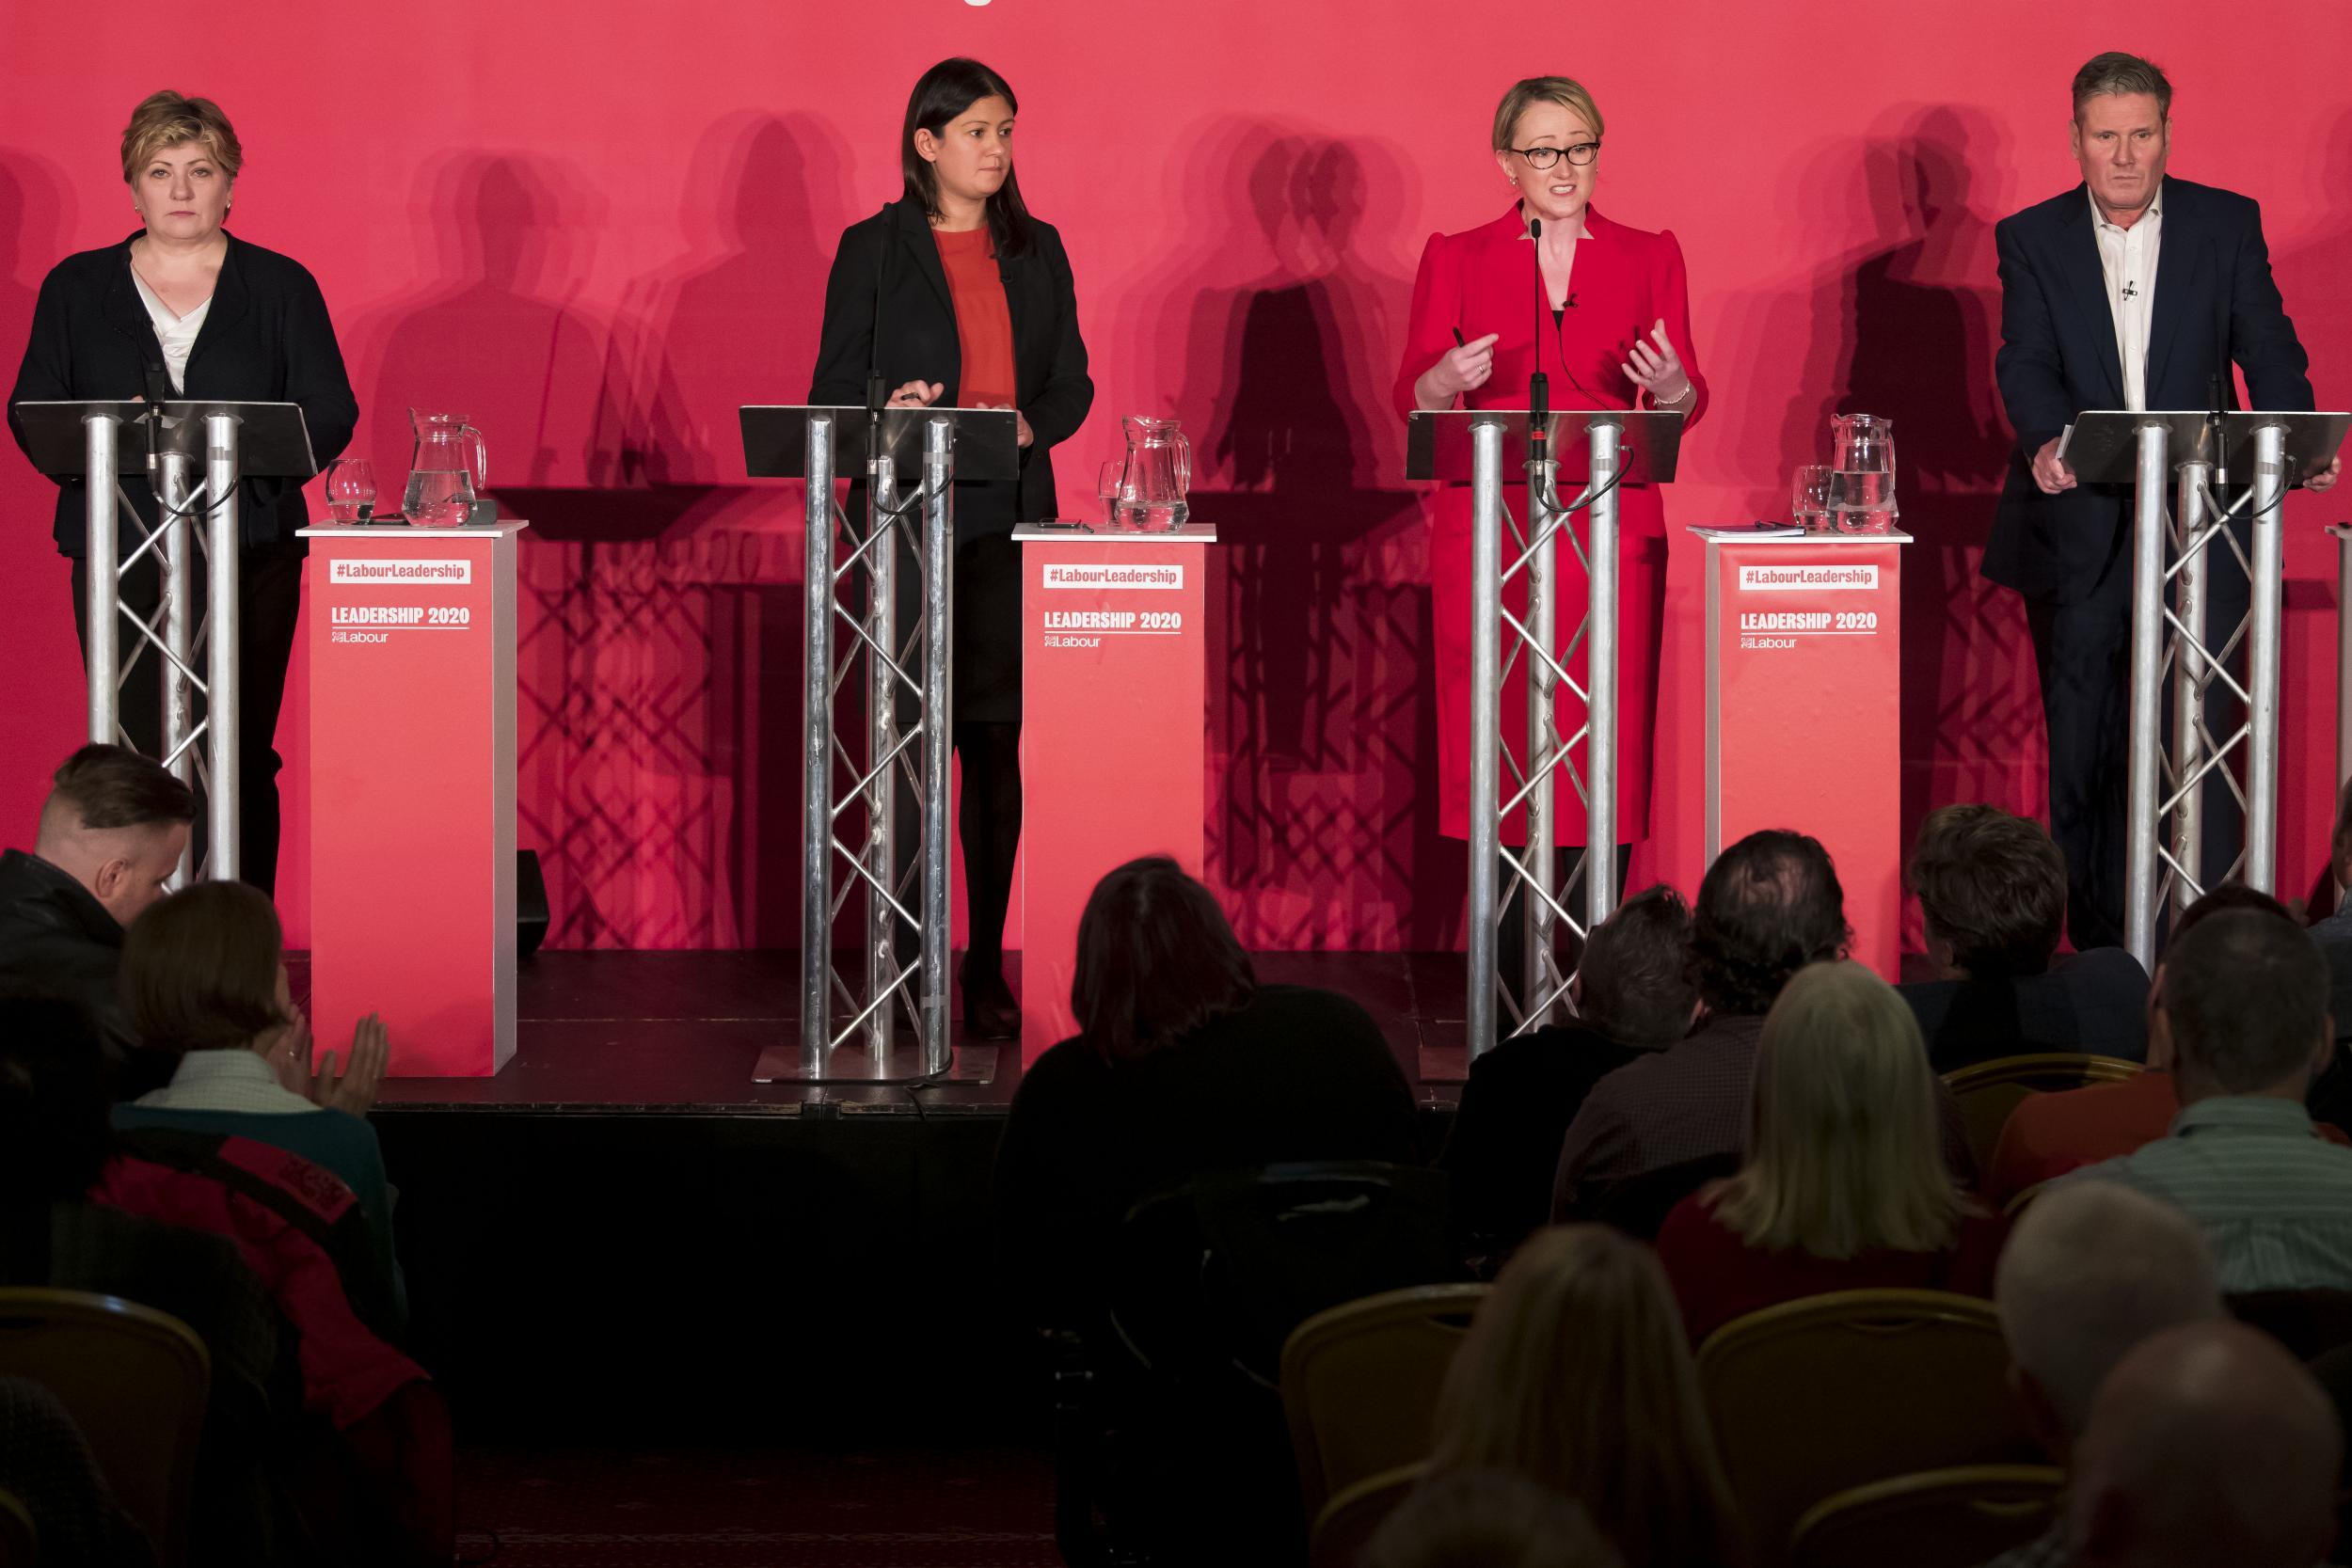 Labour leadership hustings in Cardiff on 2 February